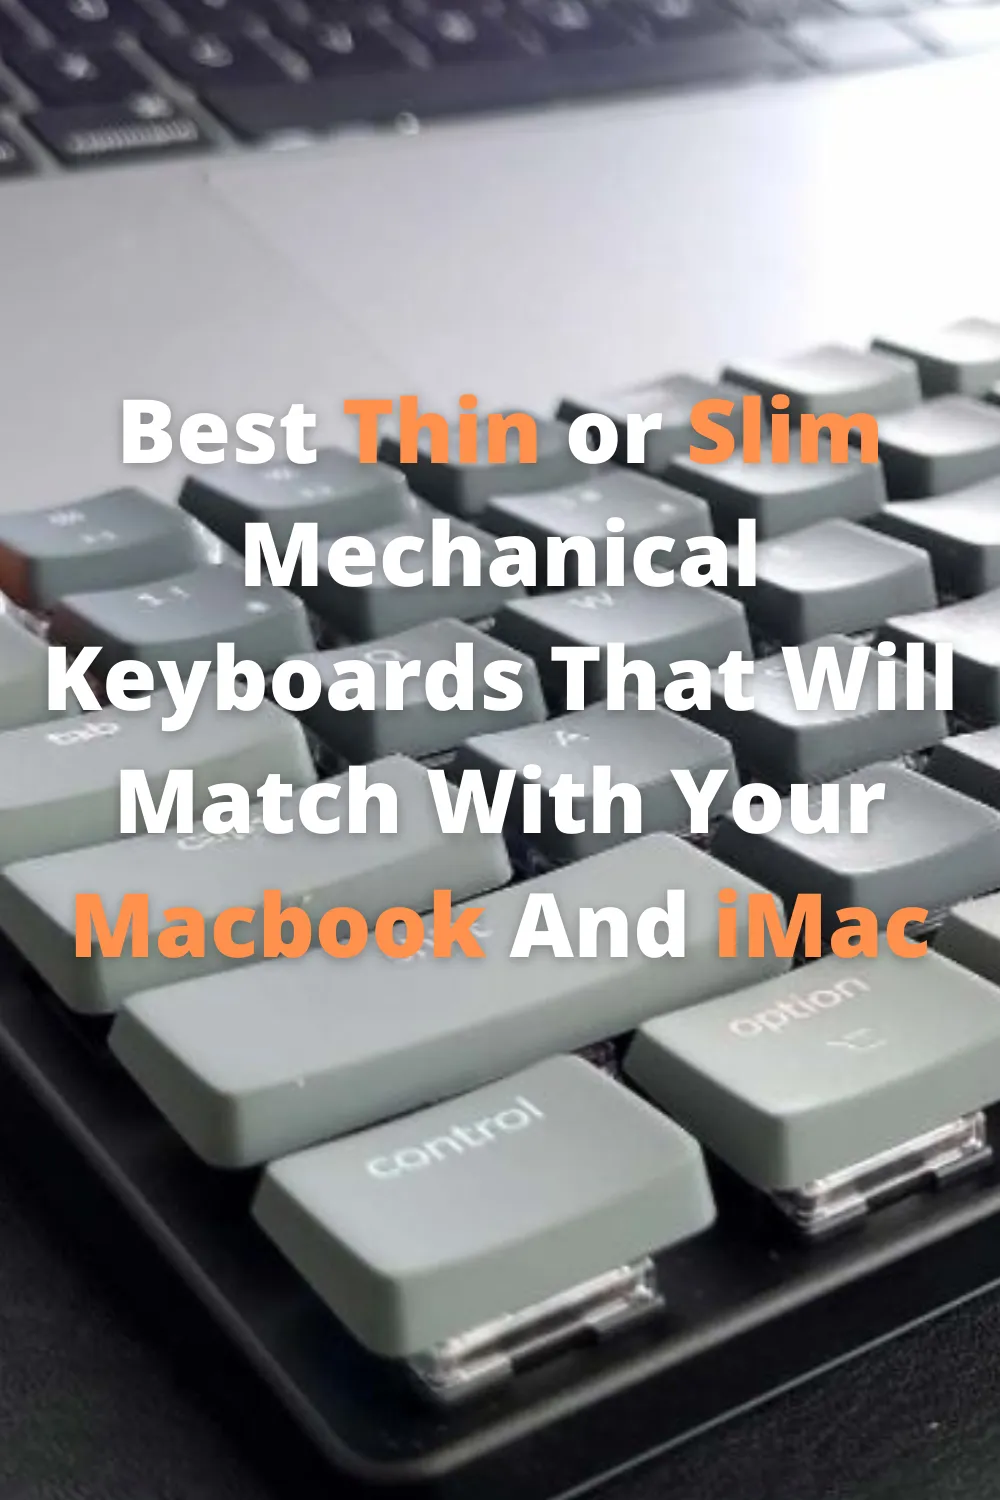 Best Thin or Slim Mechanical Keyboards That Will Match With Your Macbook And iMac